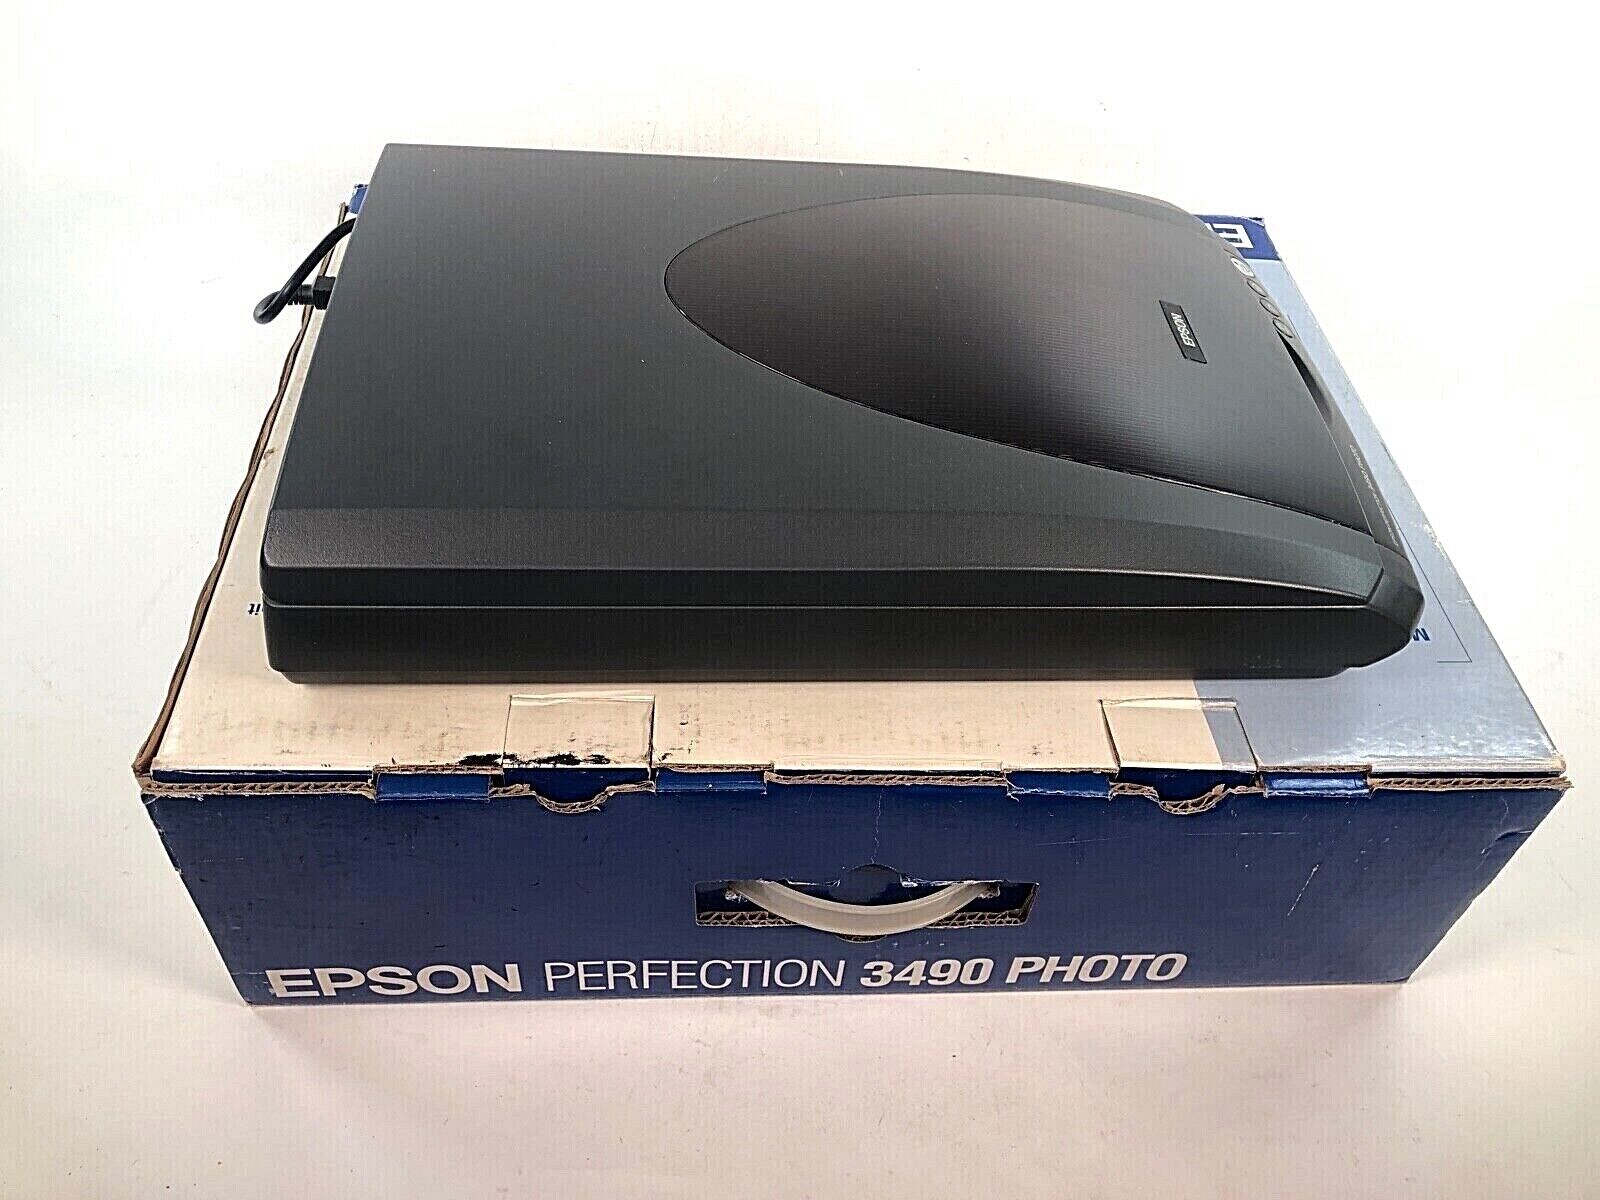 Epson Perfection 3490 Flatbed USB 2.0 Photo Scanner With Power Adapter Tested